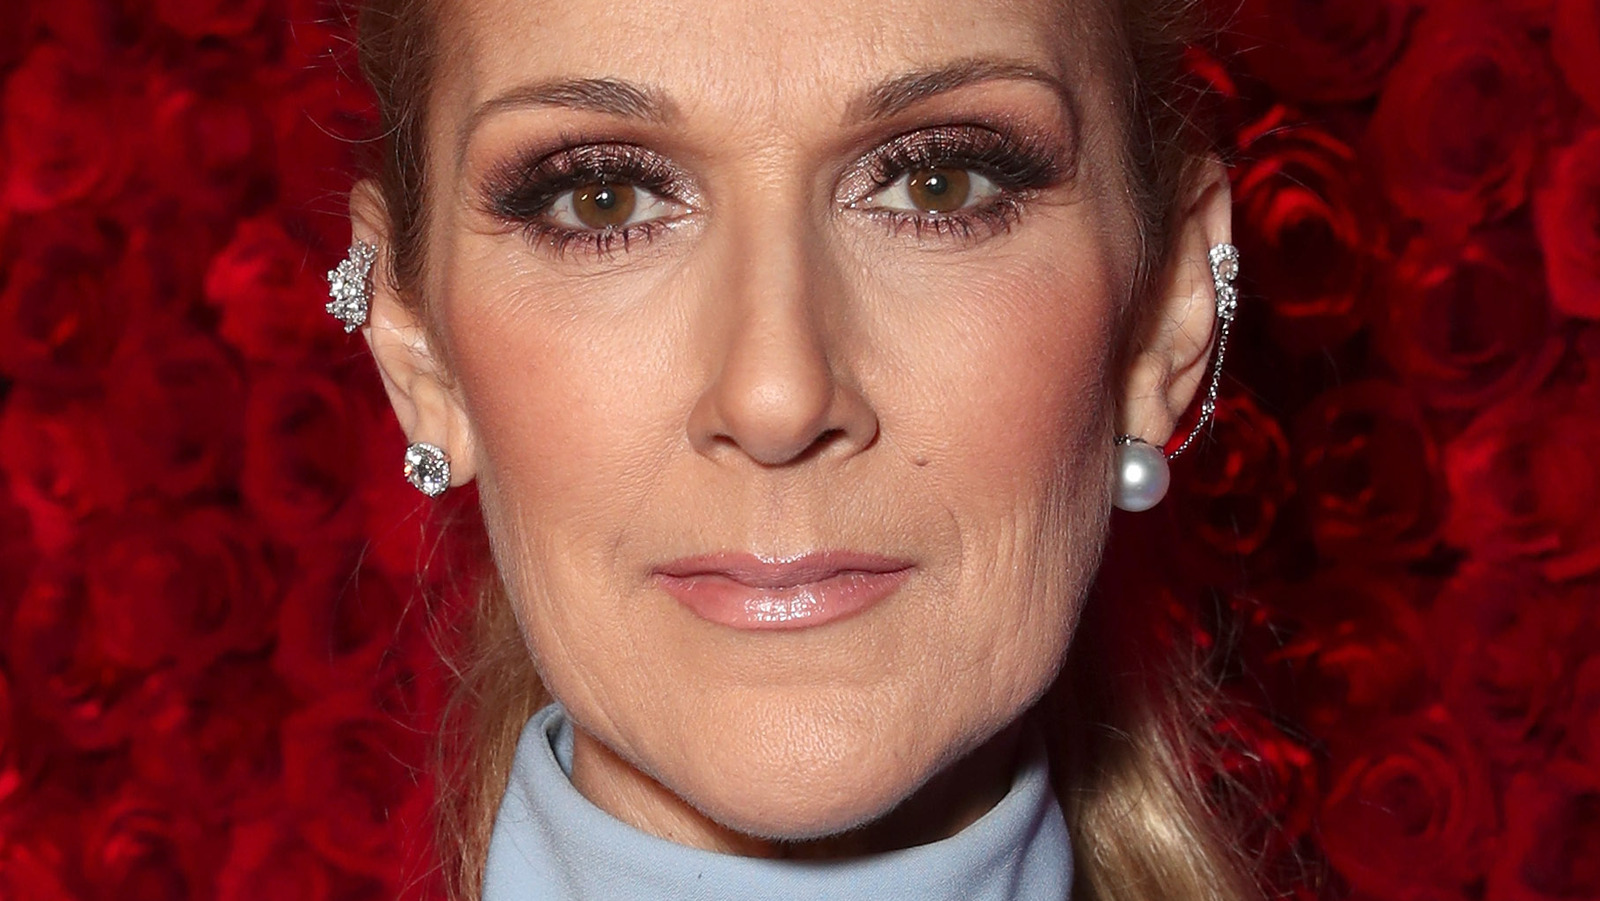 Celine Dion didn’t originally want to sing “My Heart Will Go On”